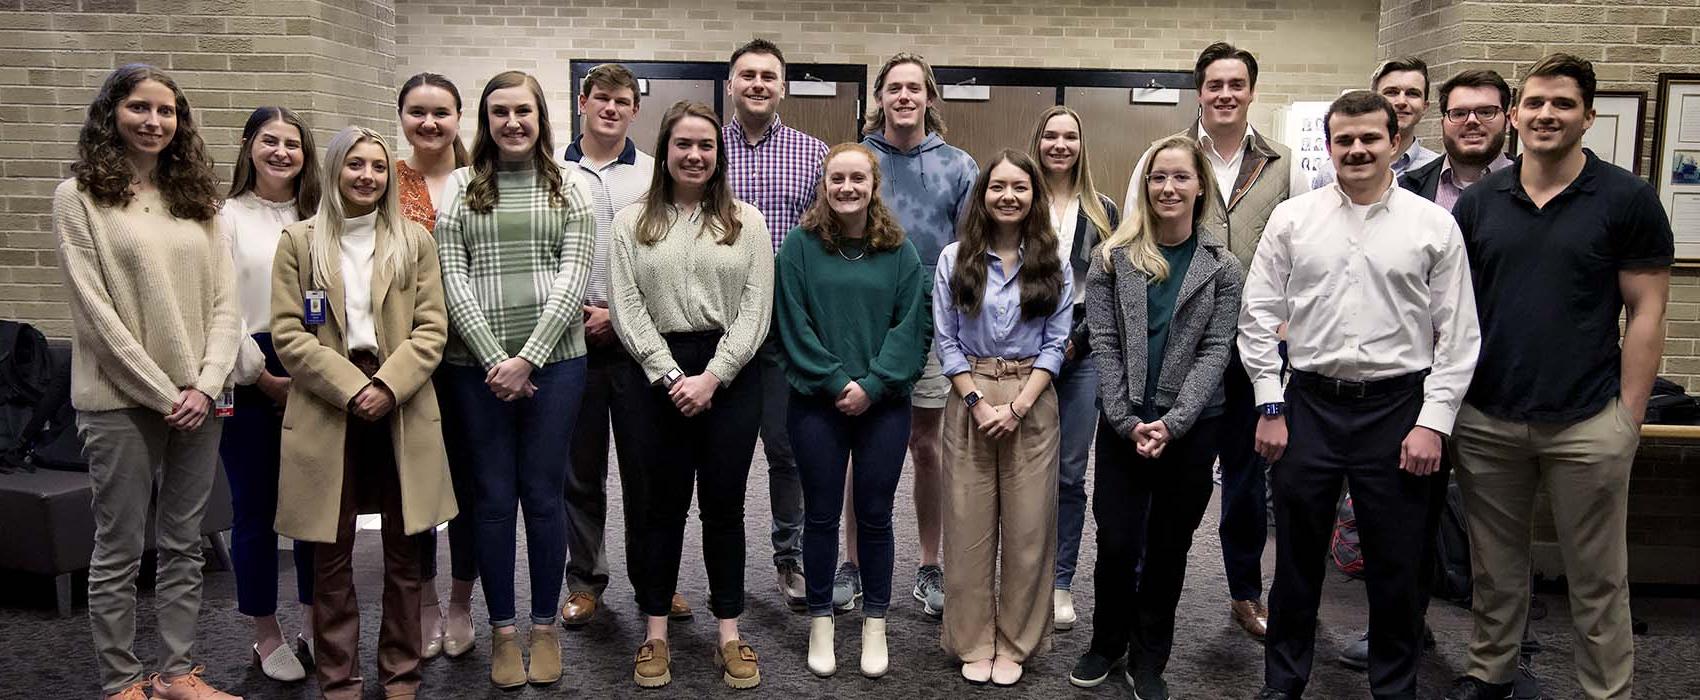 2023 Student Run FreeClinic executive board consisting of 18 individuals from 5 healthcare disciplines across both the University of South Alabama and Auburn Pharmacy.